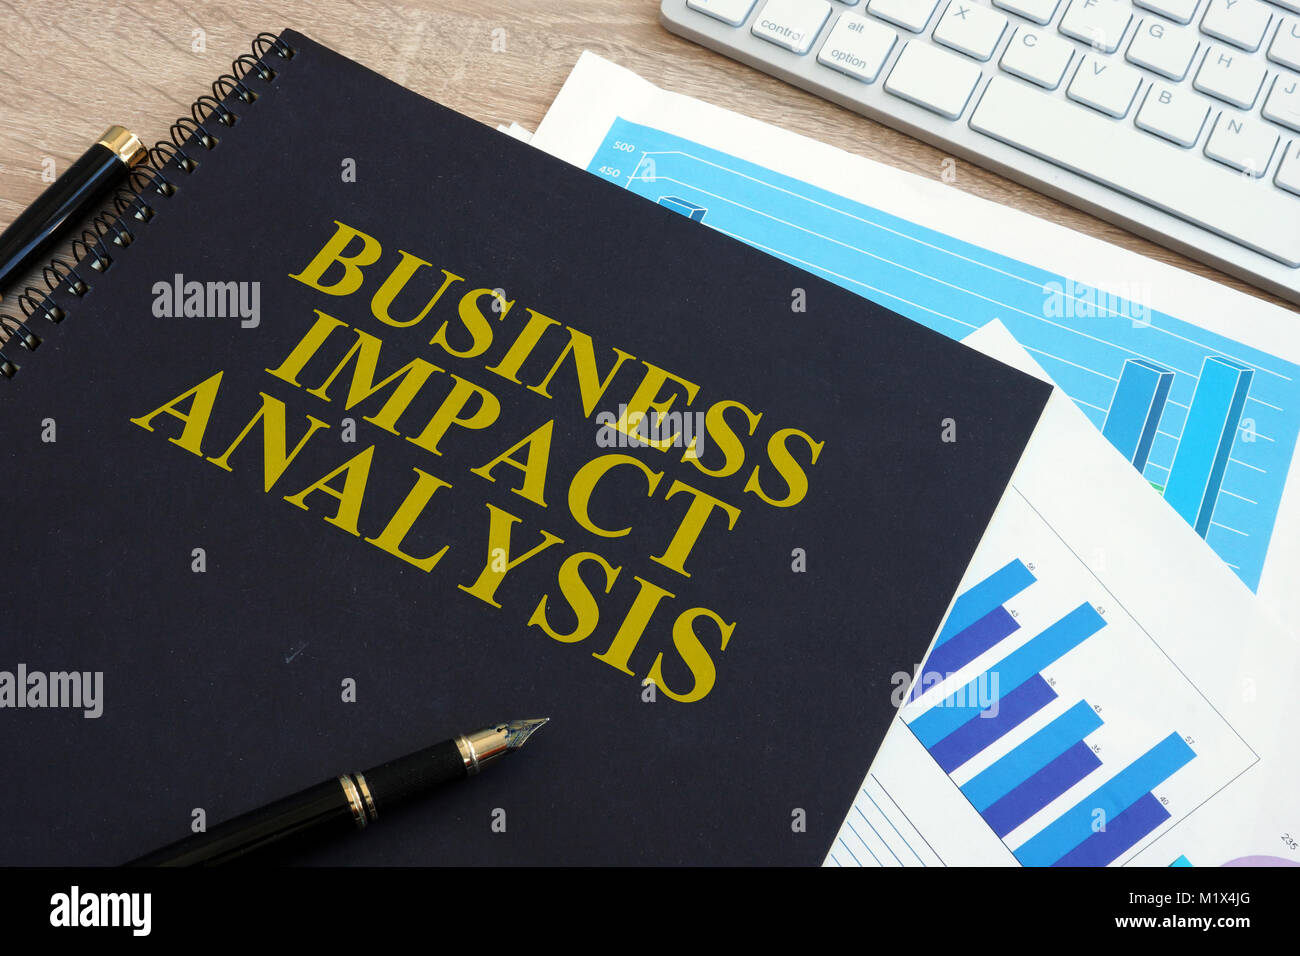 Business impact analysis (BIA) on a office desk. Stock Photo